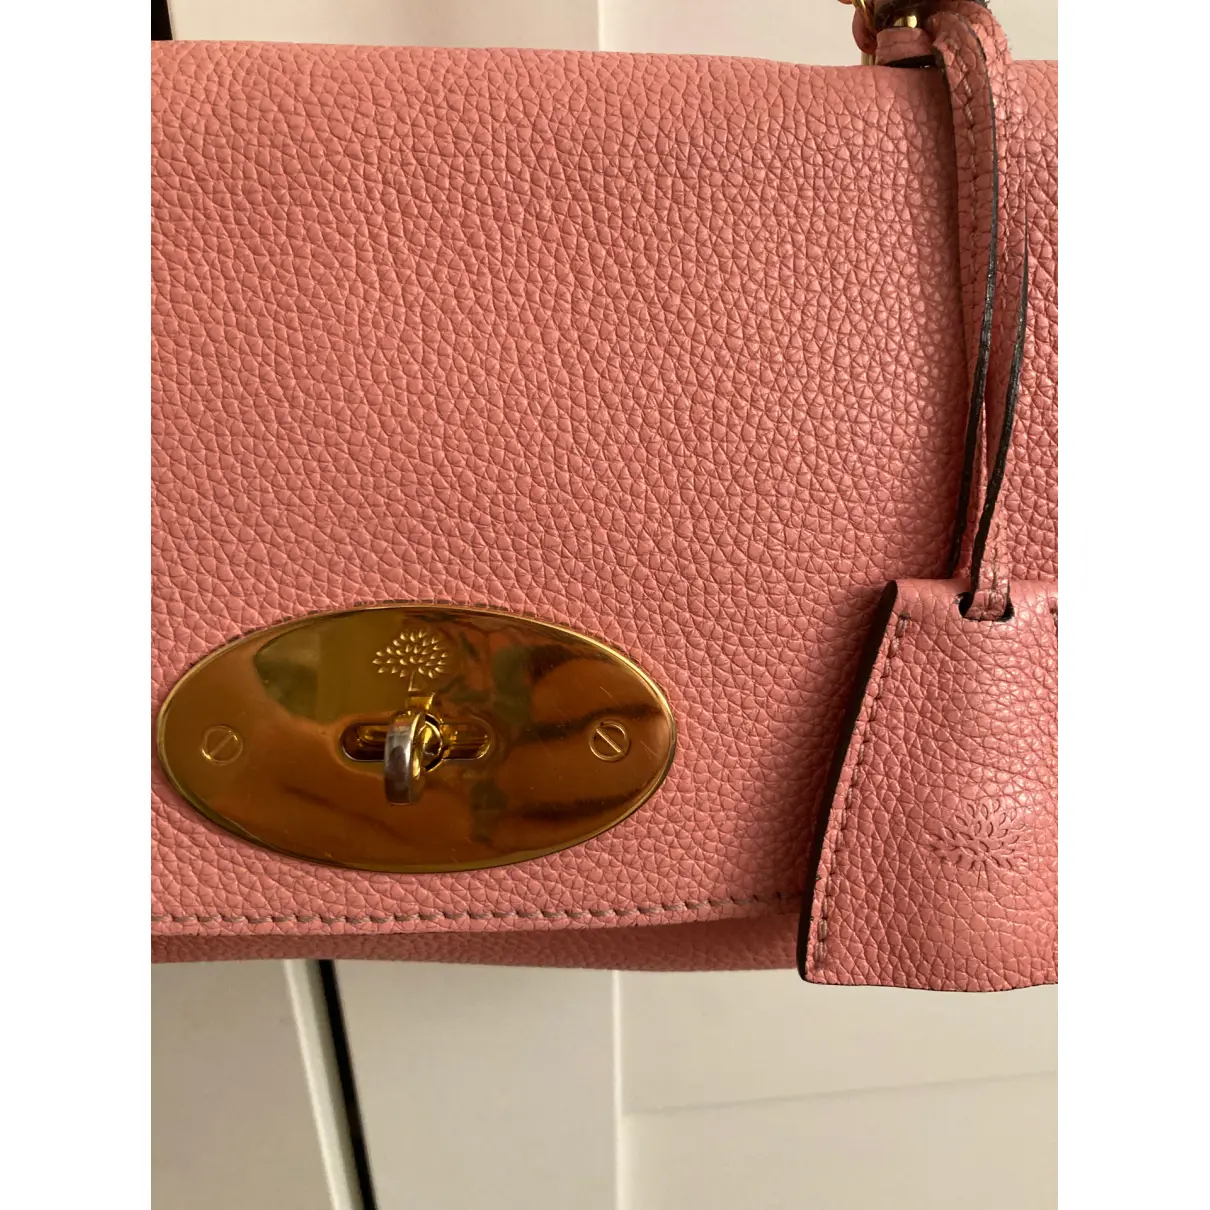 Buy Mulberry Lily leather handbag online